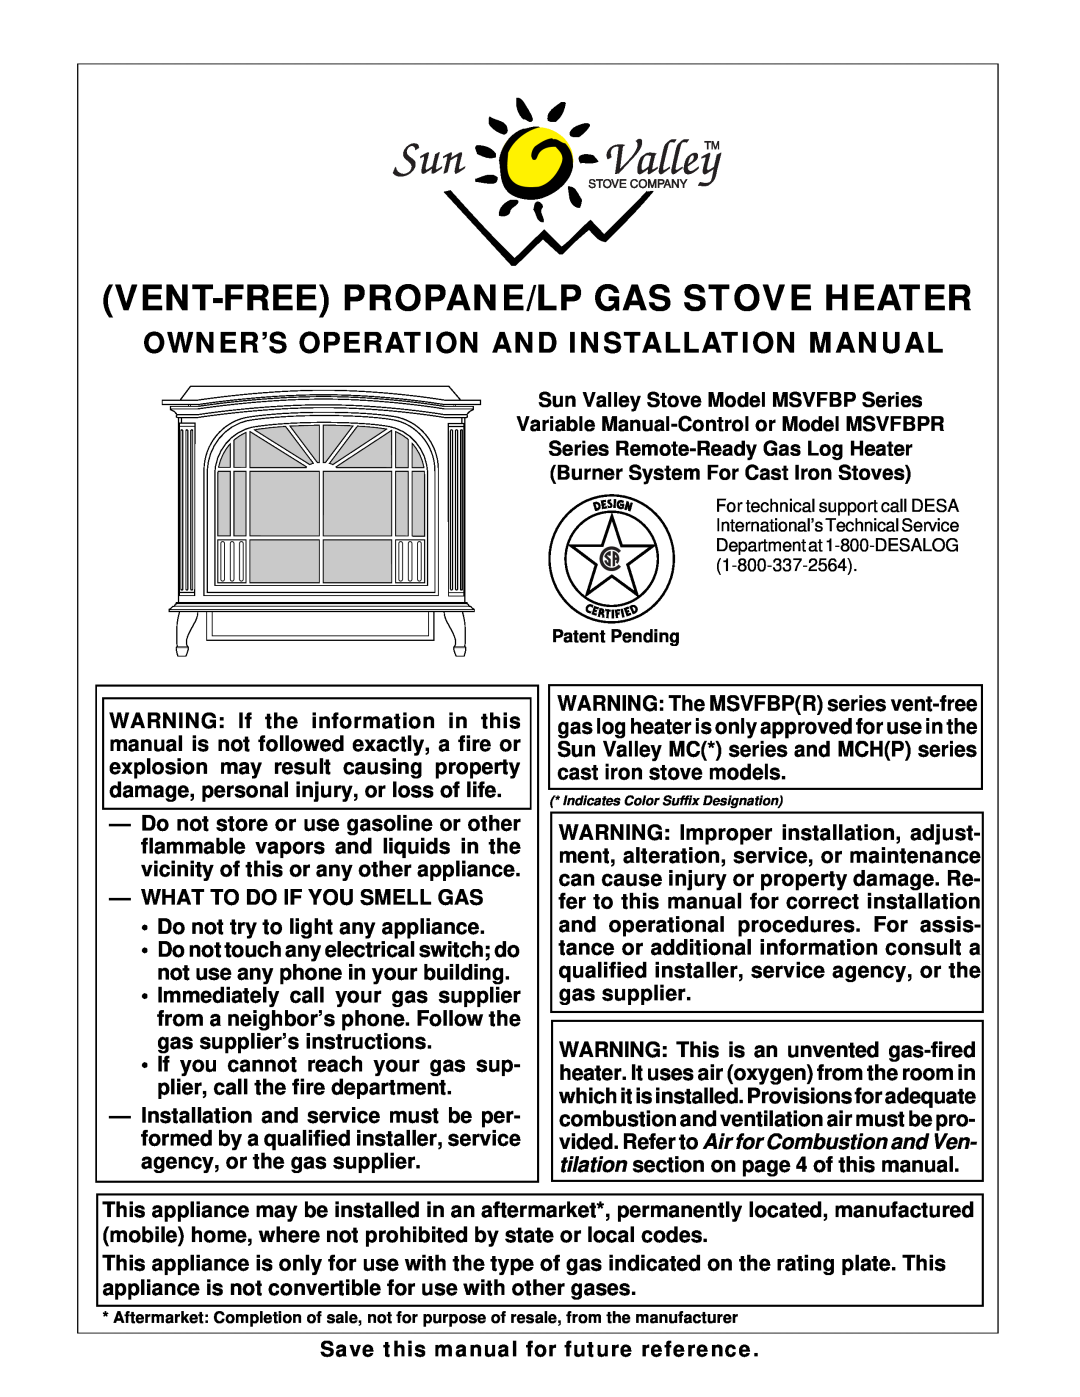 Desa MSVFBP installation manual Vent-Freepropane/Lp Gas Stove Heater, Owner’S Operation And Installation Manual 